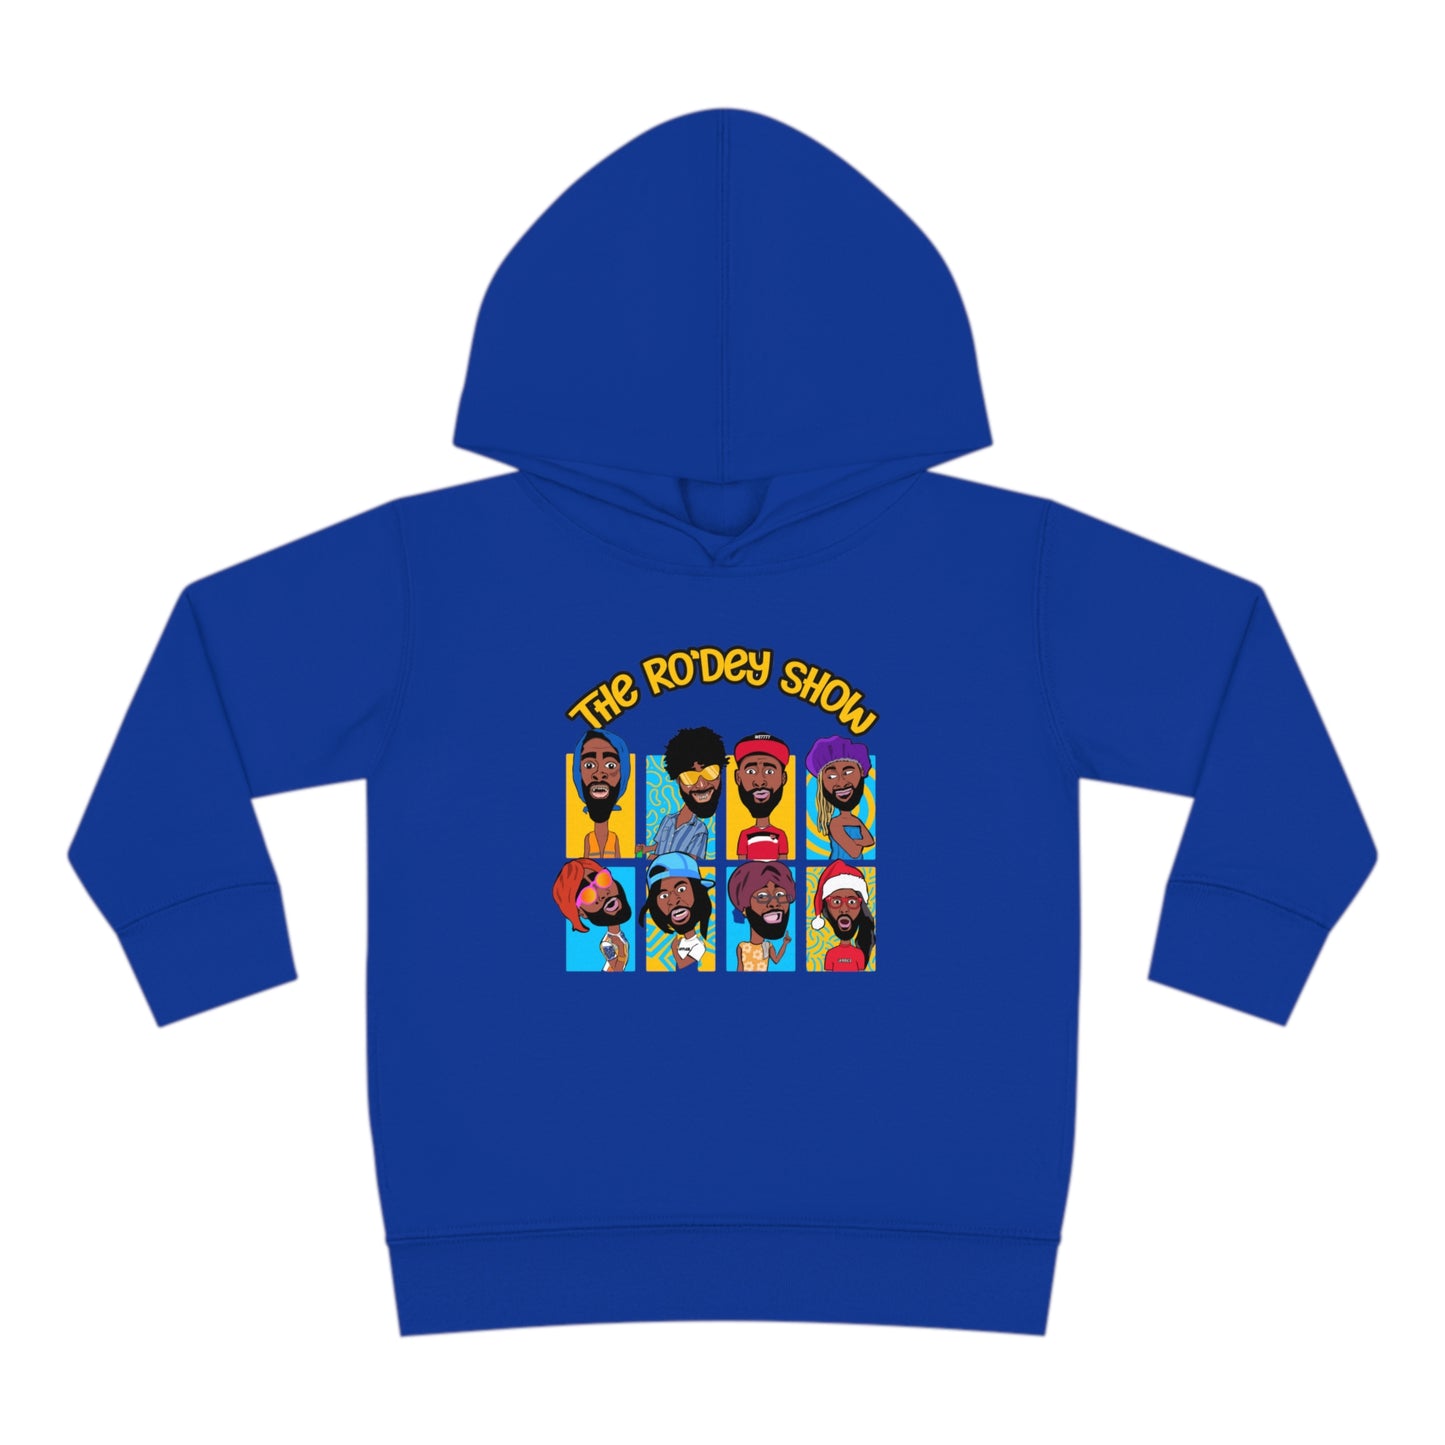 The R'odey Show (Ro'dey) Toddler Pullover Fleece Hoodie